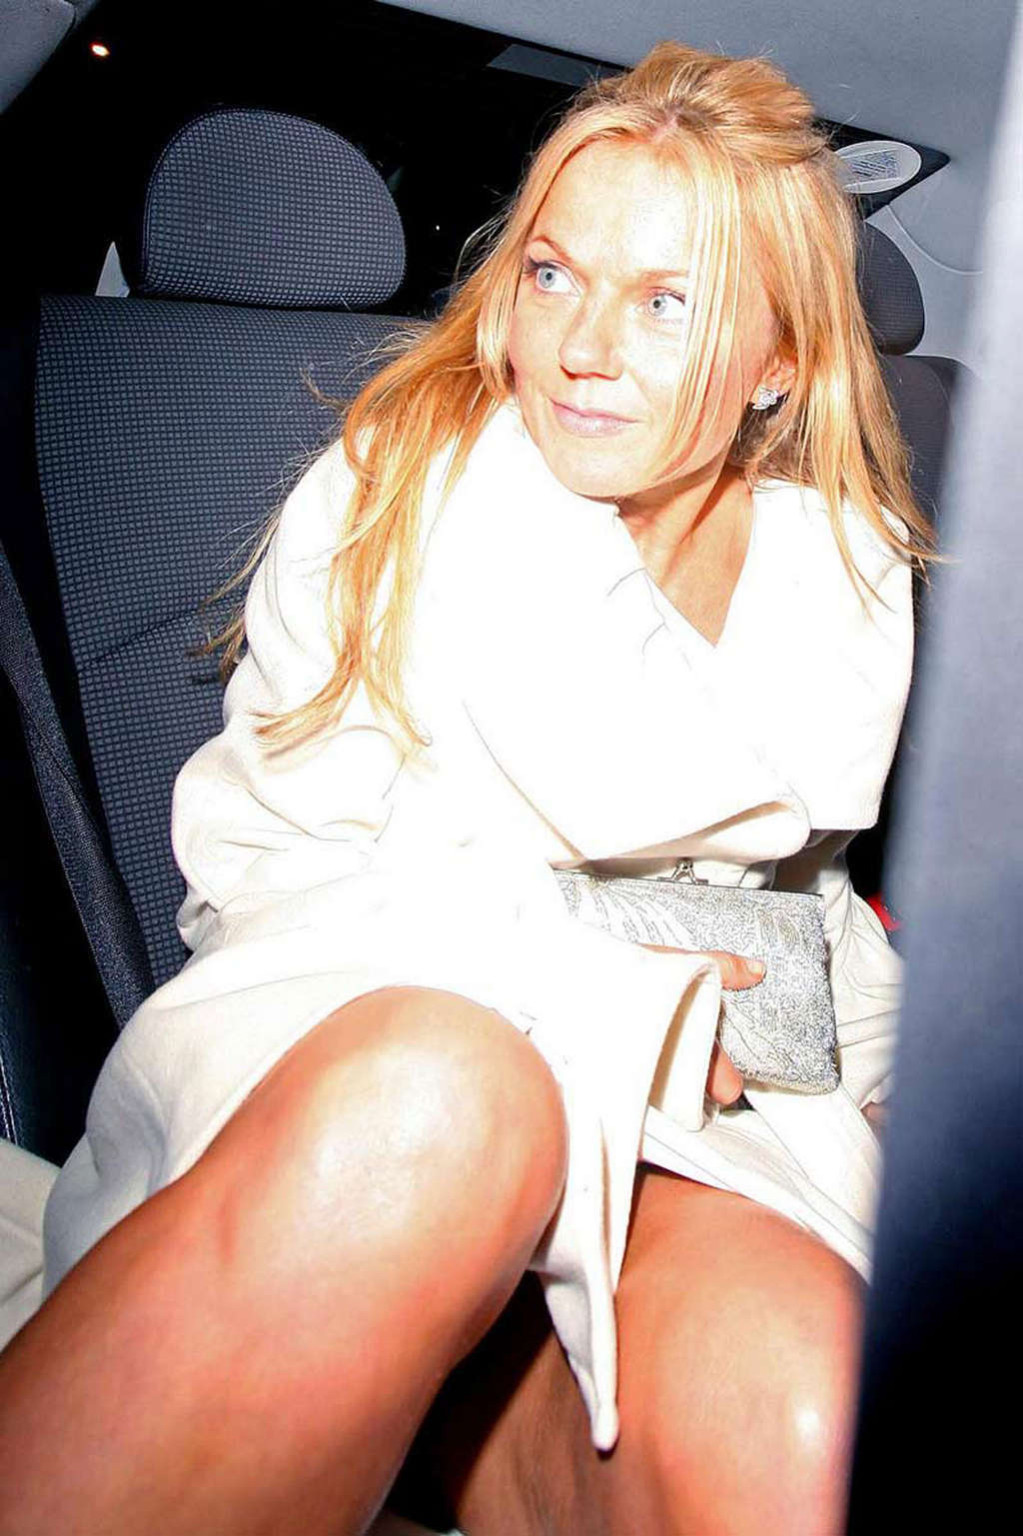 Geri Halliwell exposing her nice big tits and almost upskirt in car #75360172